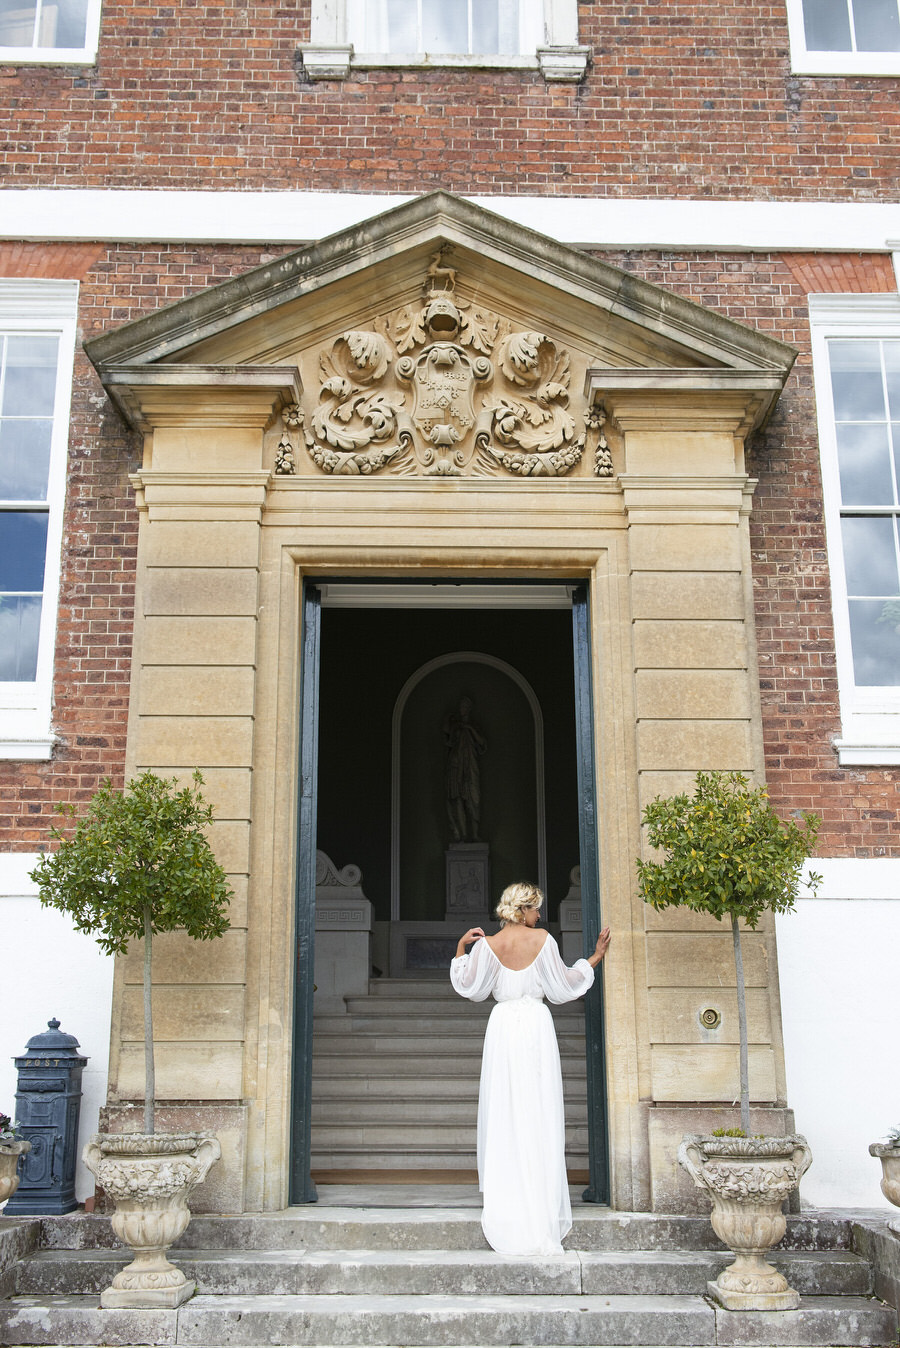 Pynes House wedding styling ideas with Ailsa Munro, Sarah Shuttle and Lottie Ettling PHotography (45)